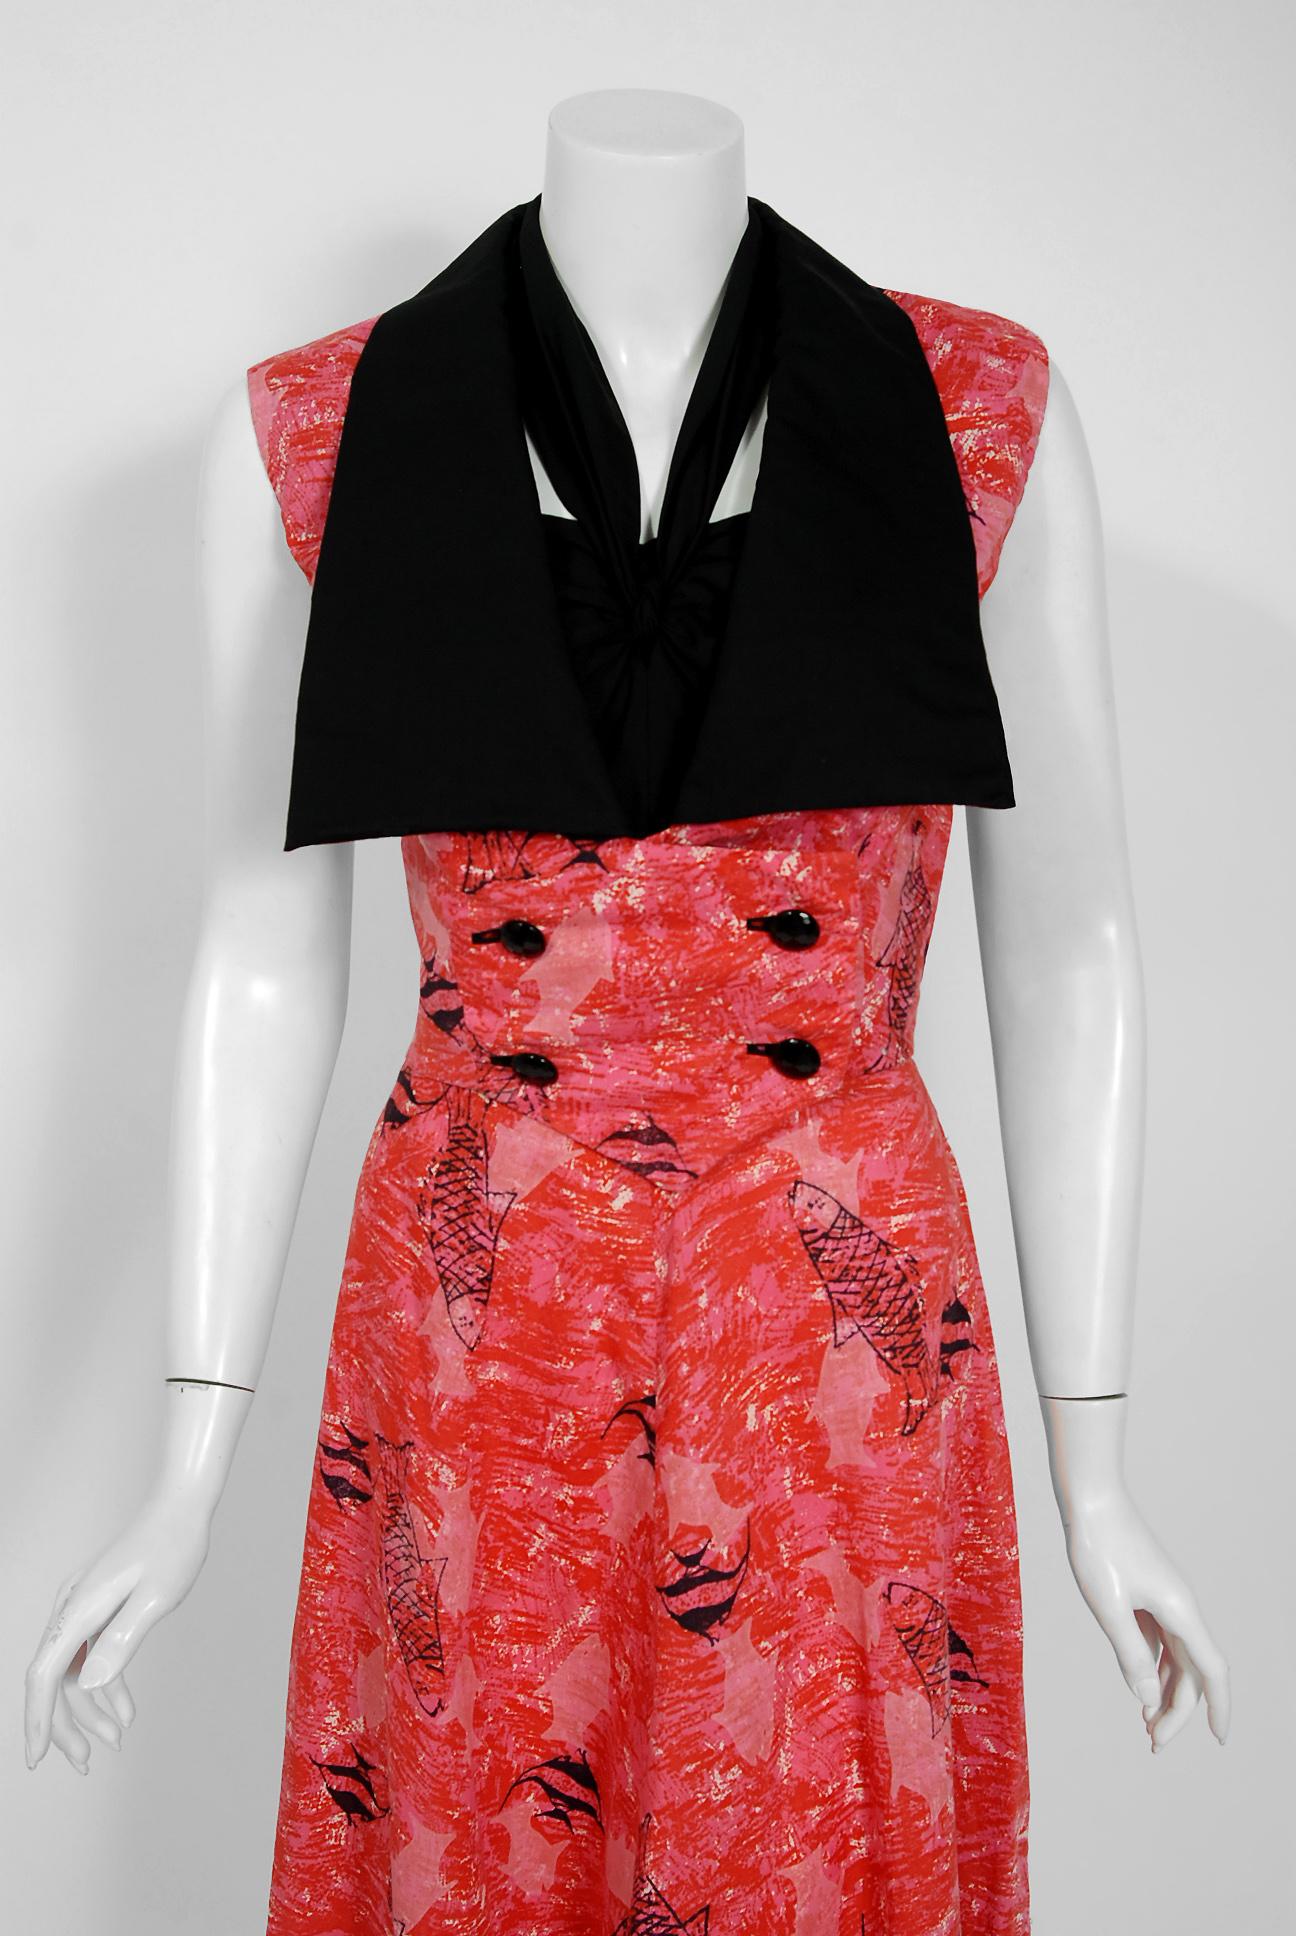 With its vibrant swimming fish novelty print and flawless styling, this Margaret Newman designer dress ensemble has the casual elegance the 1950's were known for. The fully-boned sweetheart plunge bodice with halter strap is very flattering and